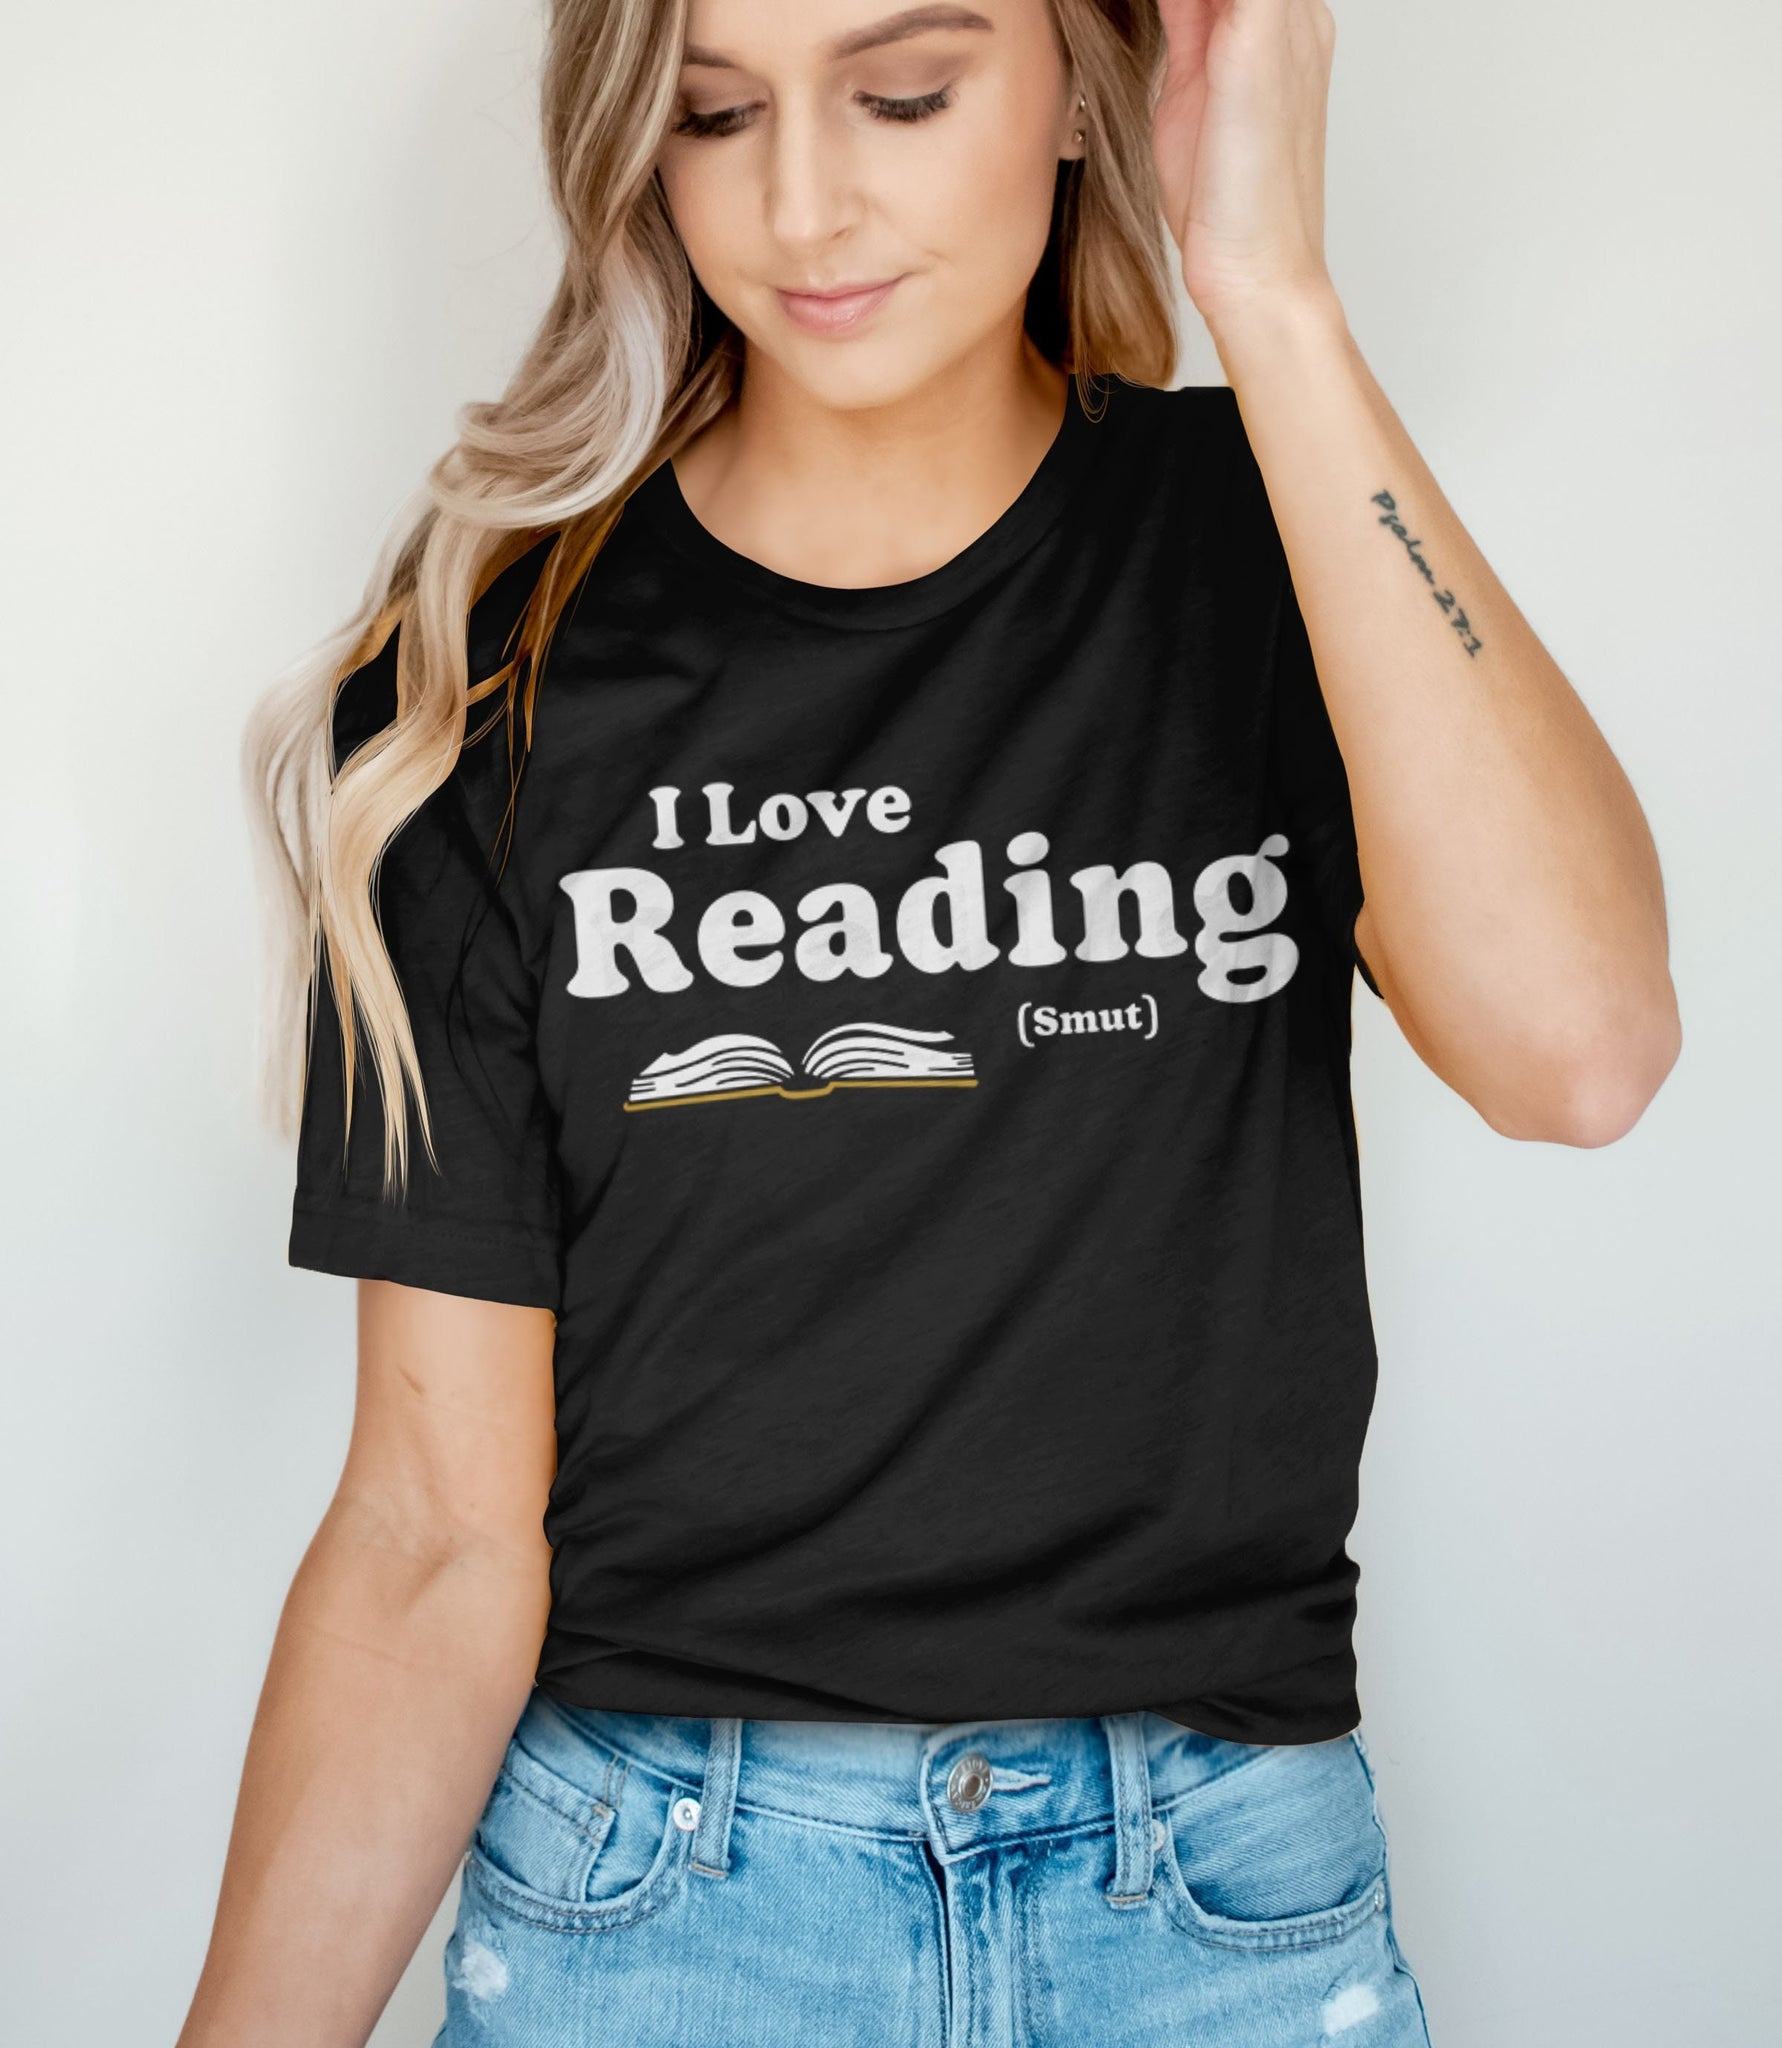 I Love Reading Smut Shirt, Black Unisex S by BootsTees